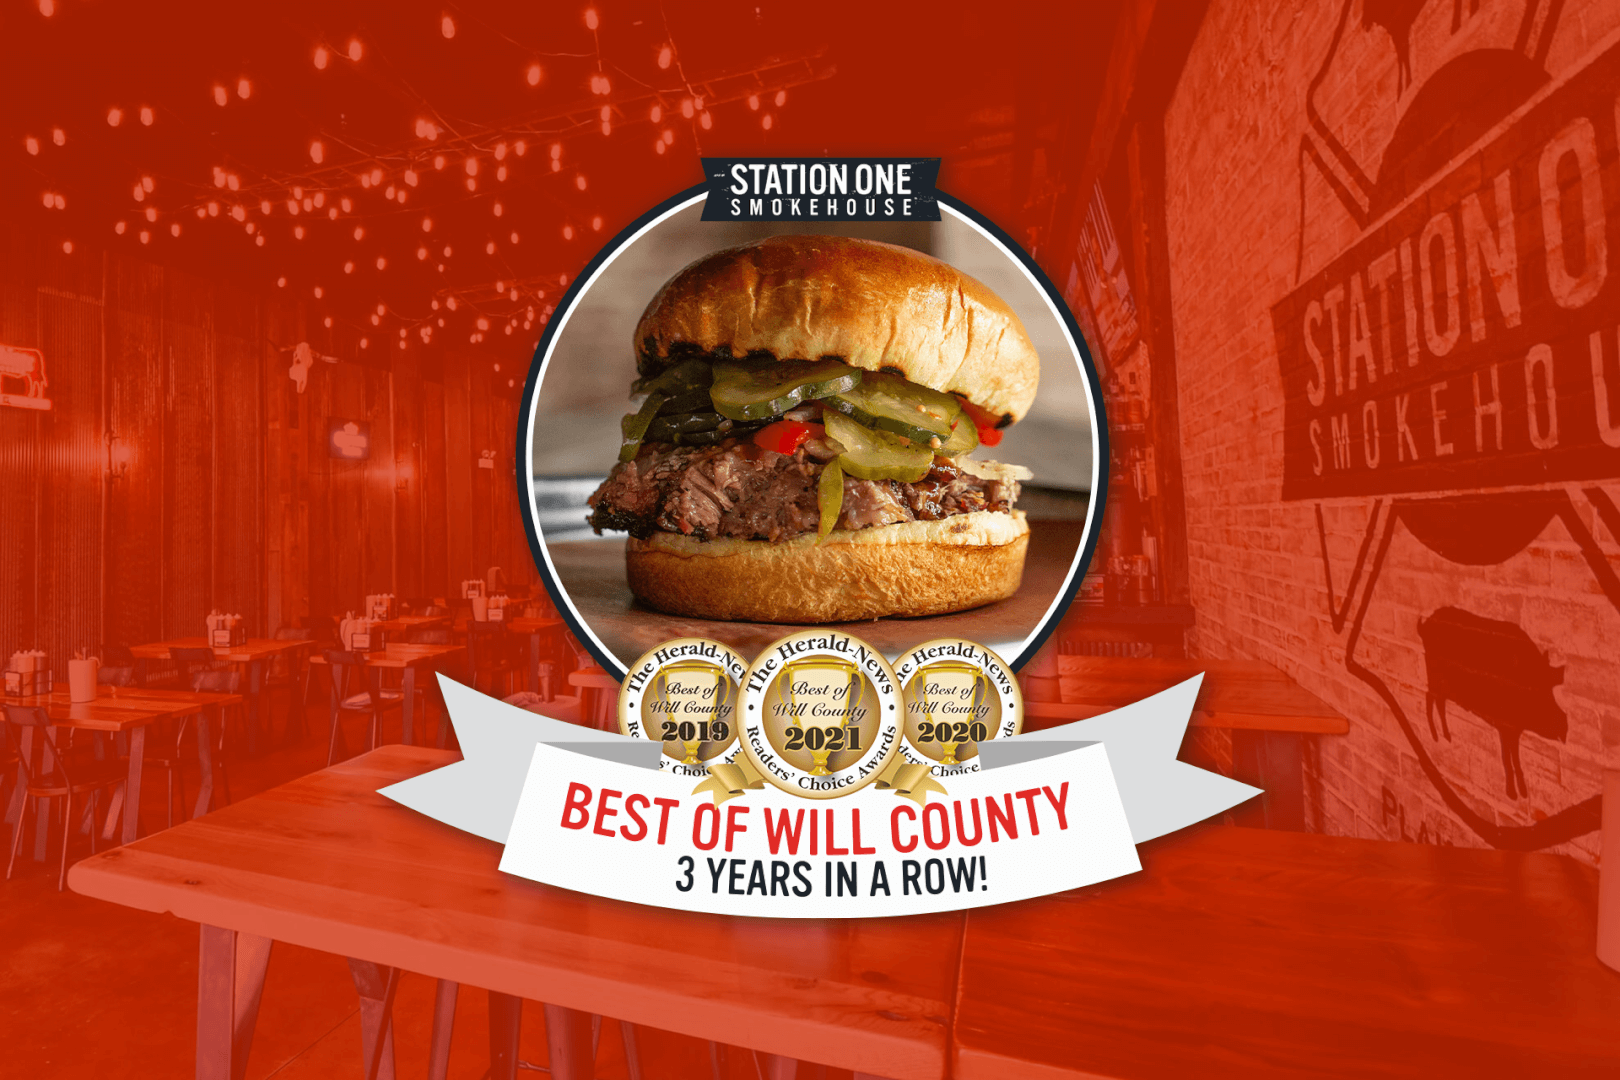 Station One Smokehouse Wins the “Best of Will County” for the third consecutive year in The Herald’s Reader’s Choice Awards